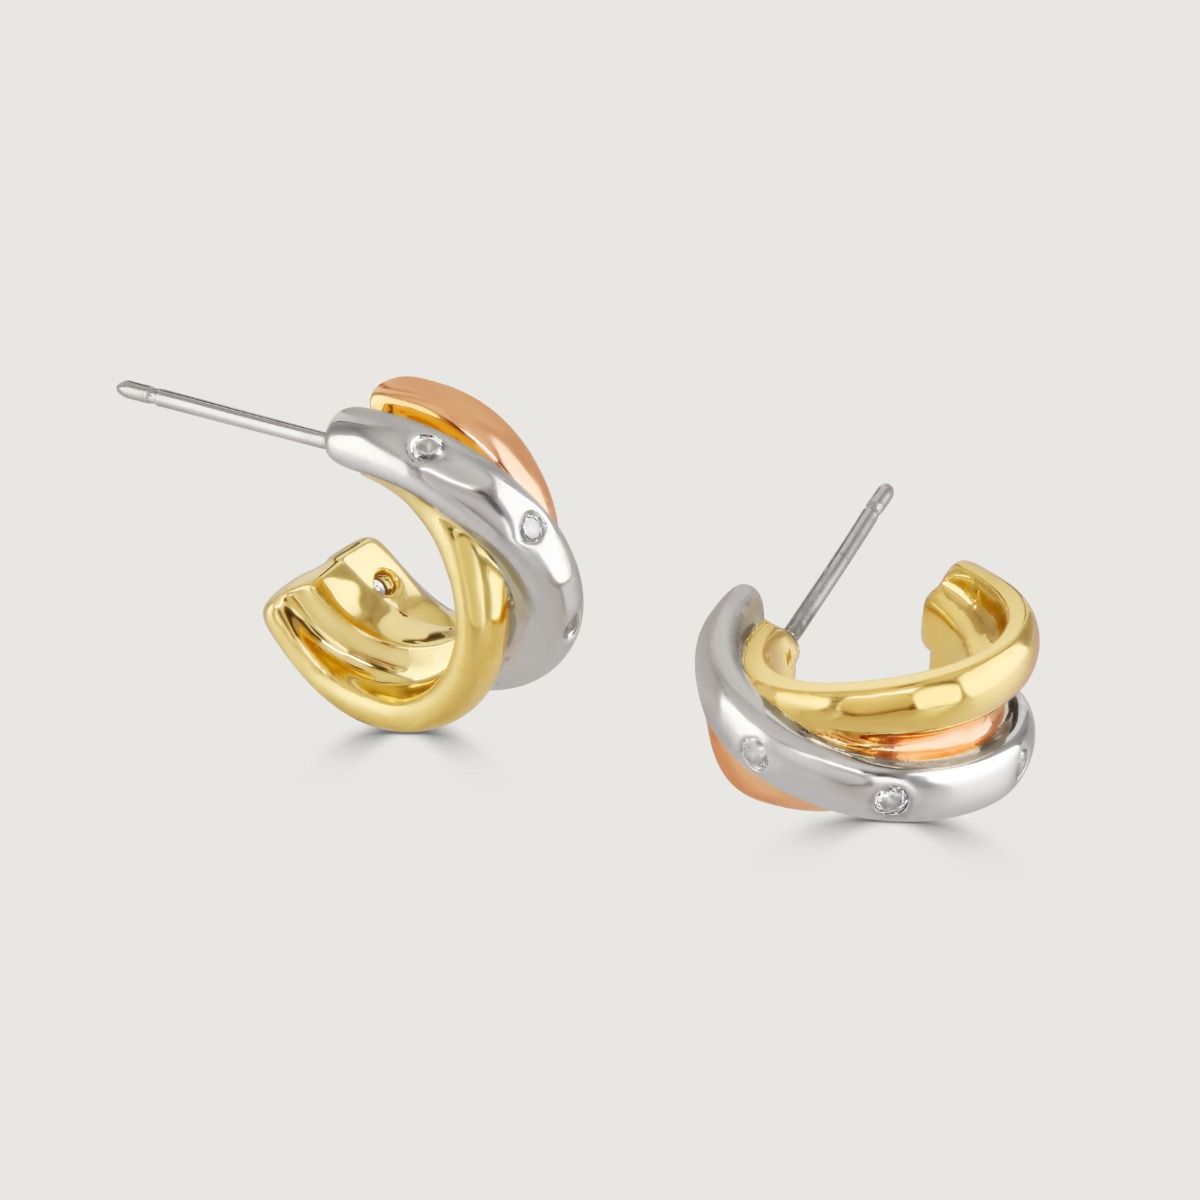 Part of our award-winning Russian Trio Set. Each individual band is plated with either gold, rose gold, or rhodium to create the three colors. Each piece is then hand-polished to give a high lustre. The stones are hand-set clear cubic zirconia. 